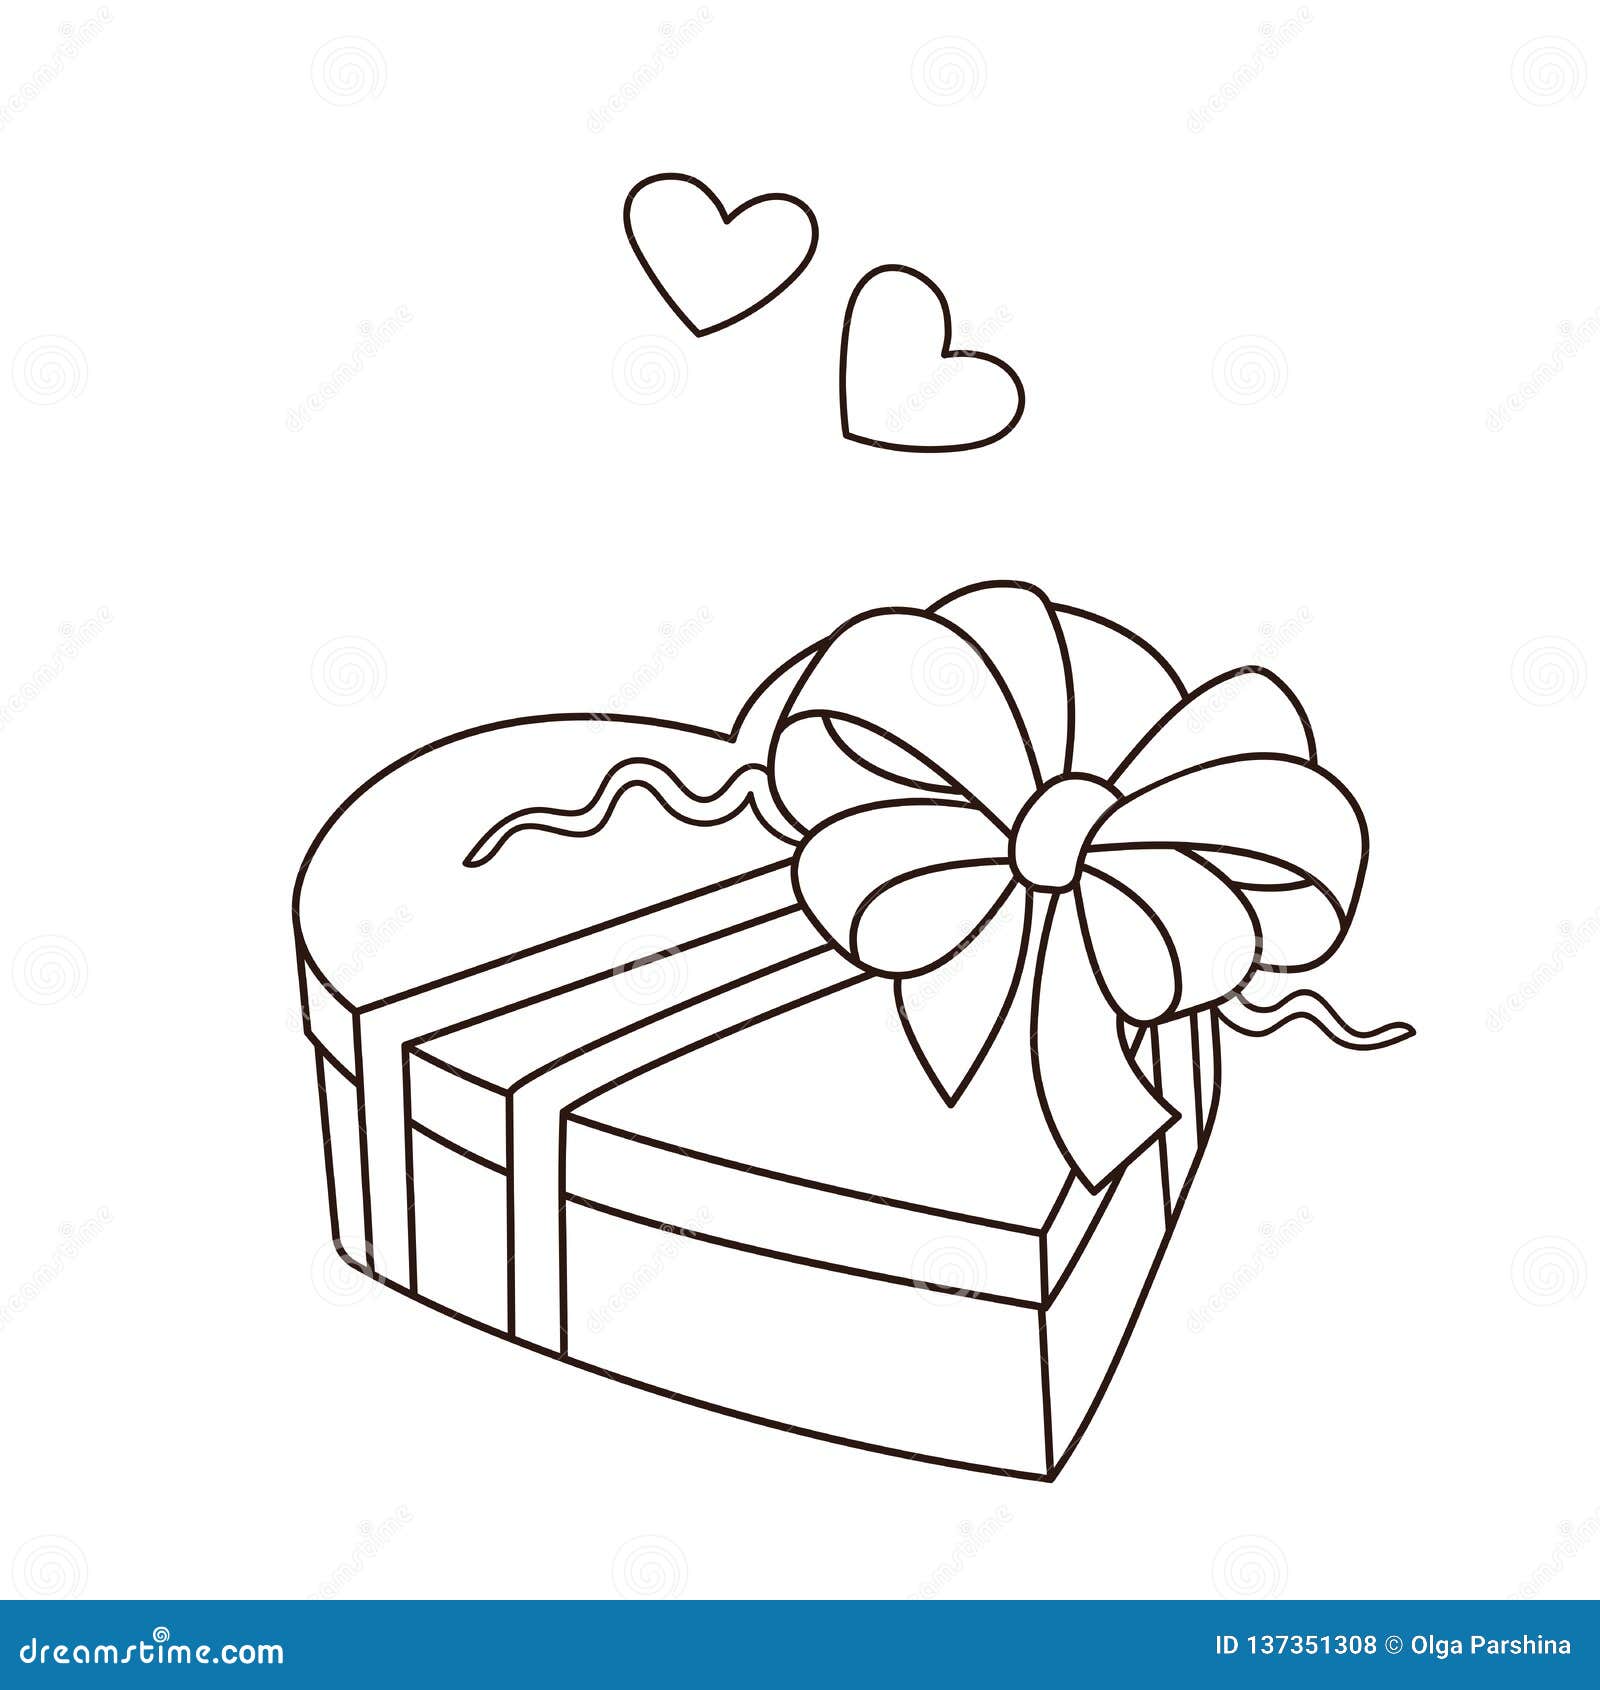 Coloring page outline of gift birthday valentines day stock vector